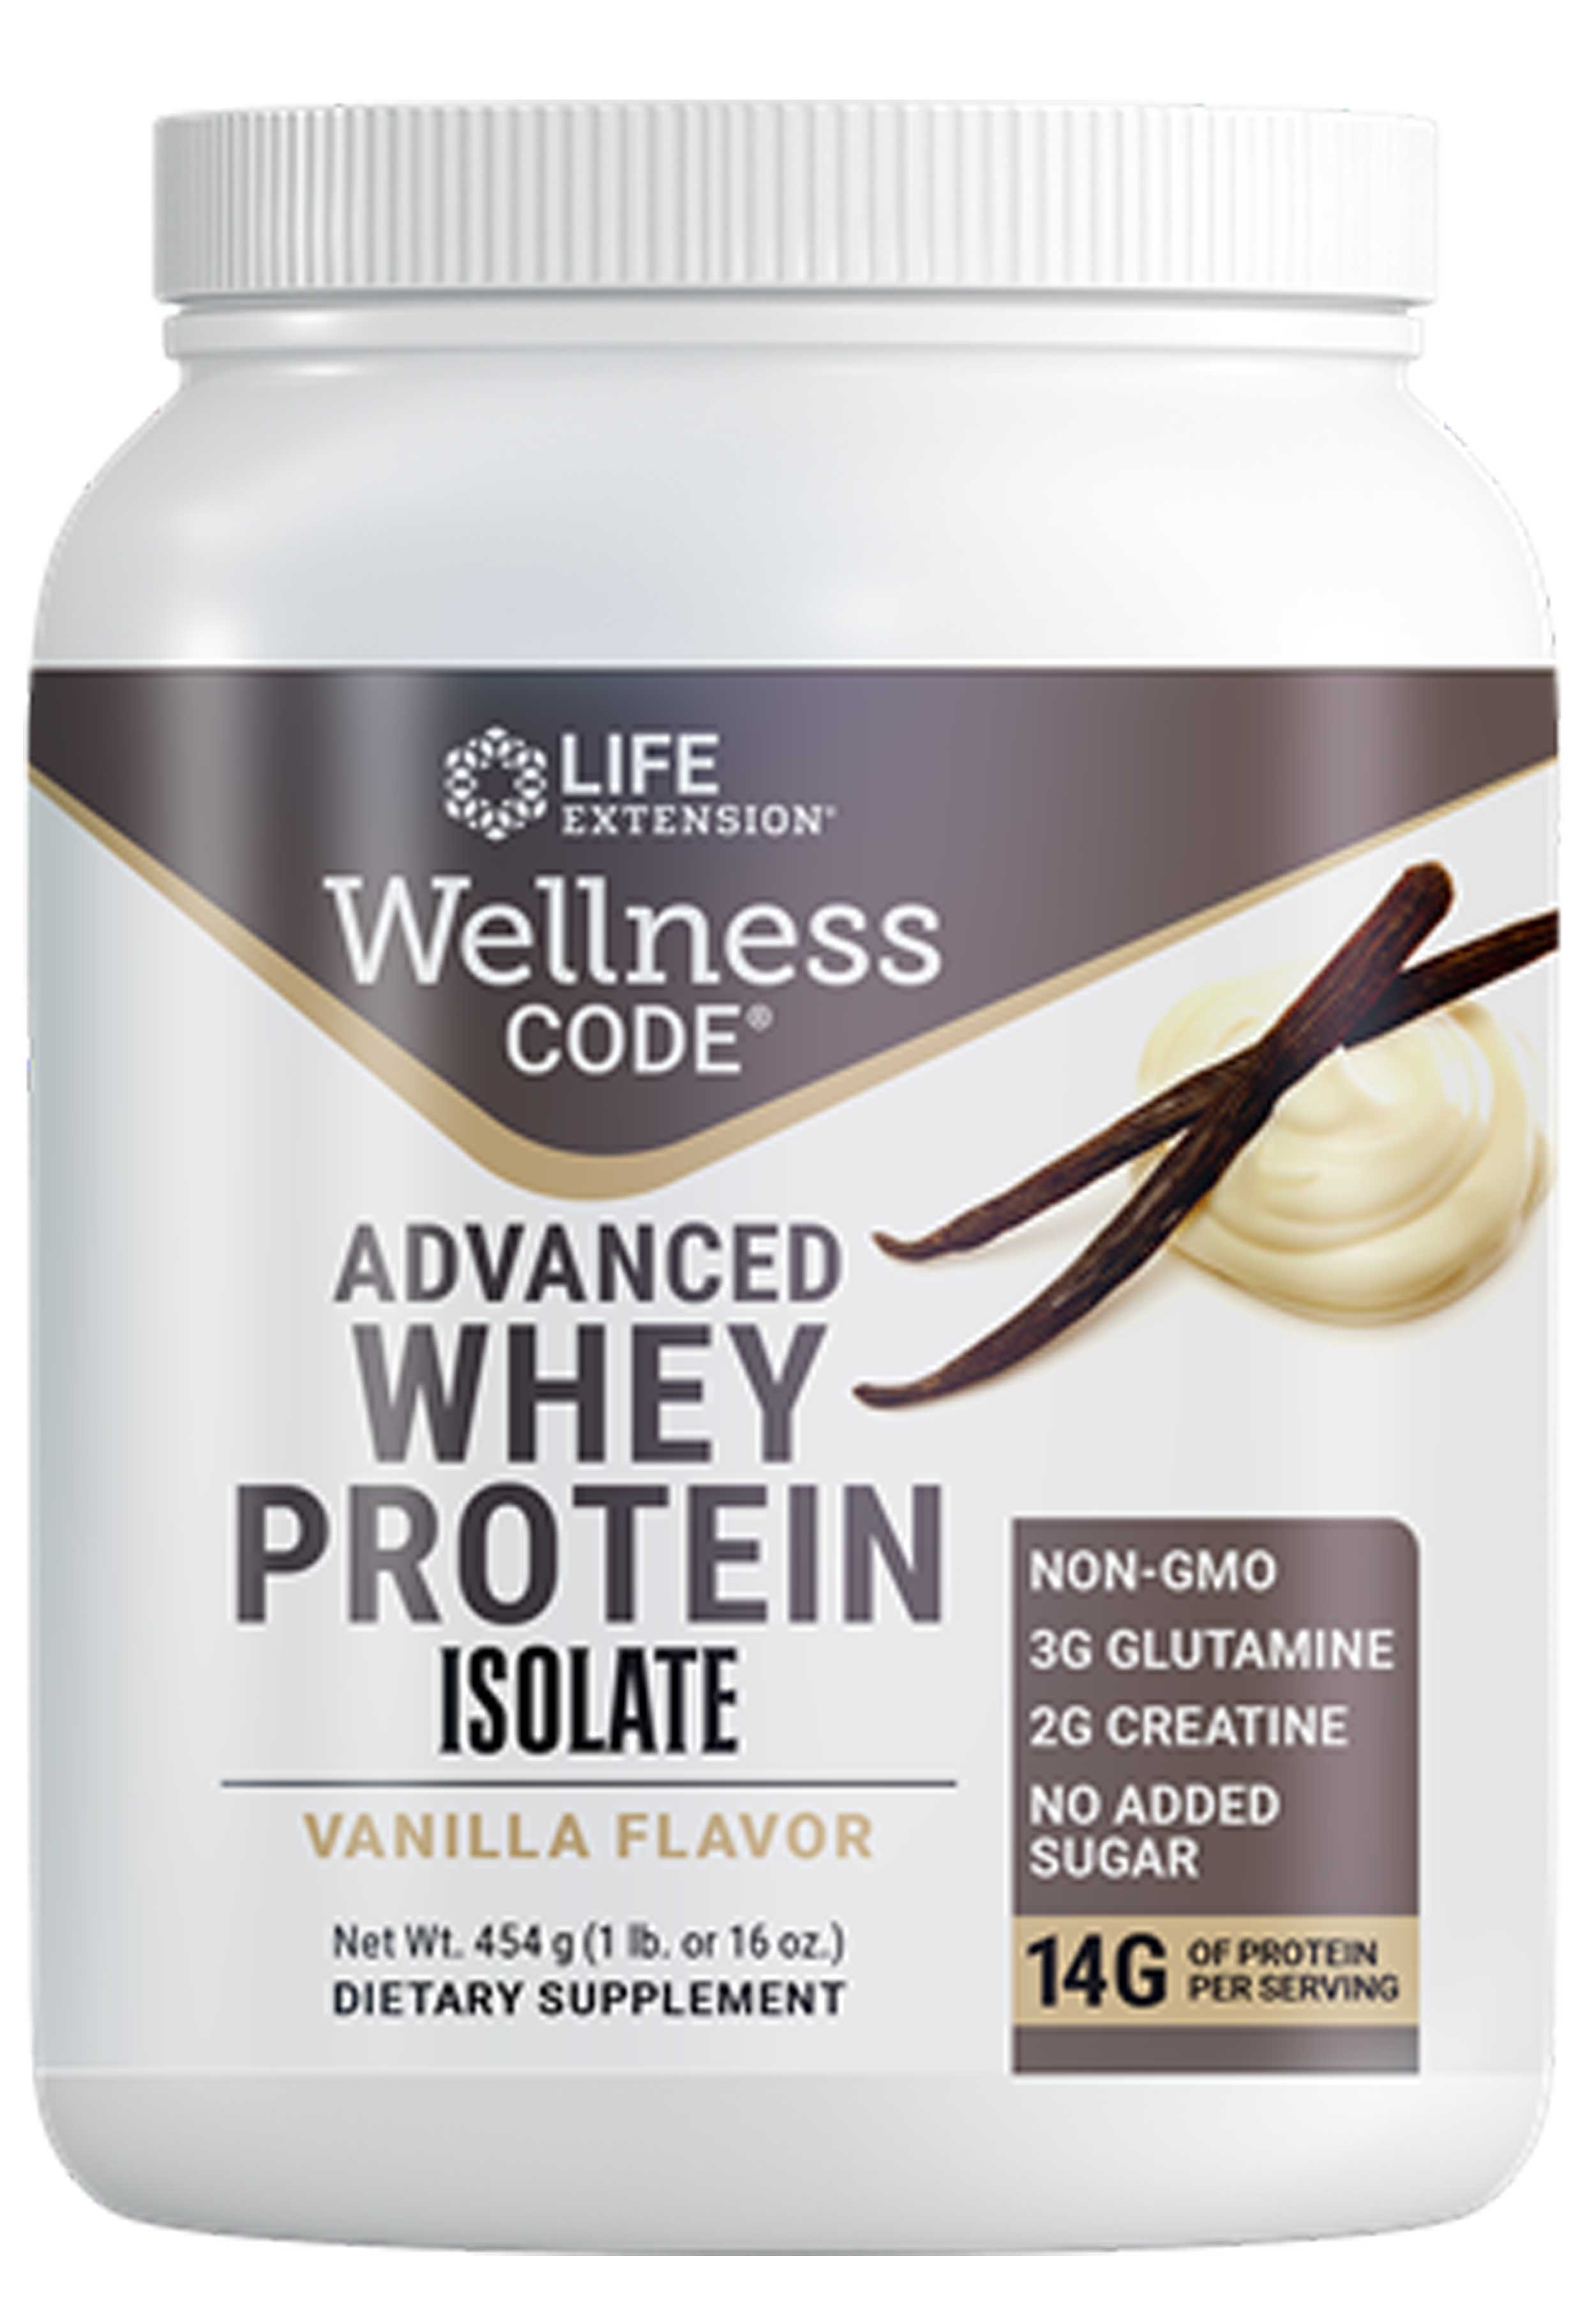 Life Extension Wellness Code Advanced Whey Protein Isolate (Formerly Creatine Whey Glutamine Powder)